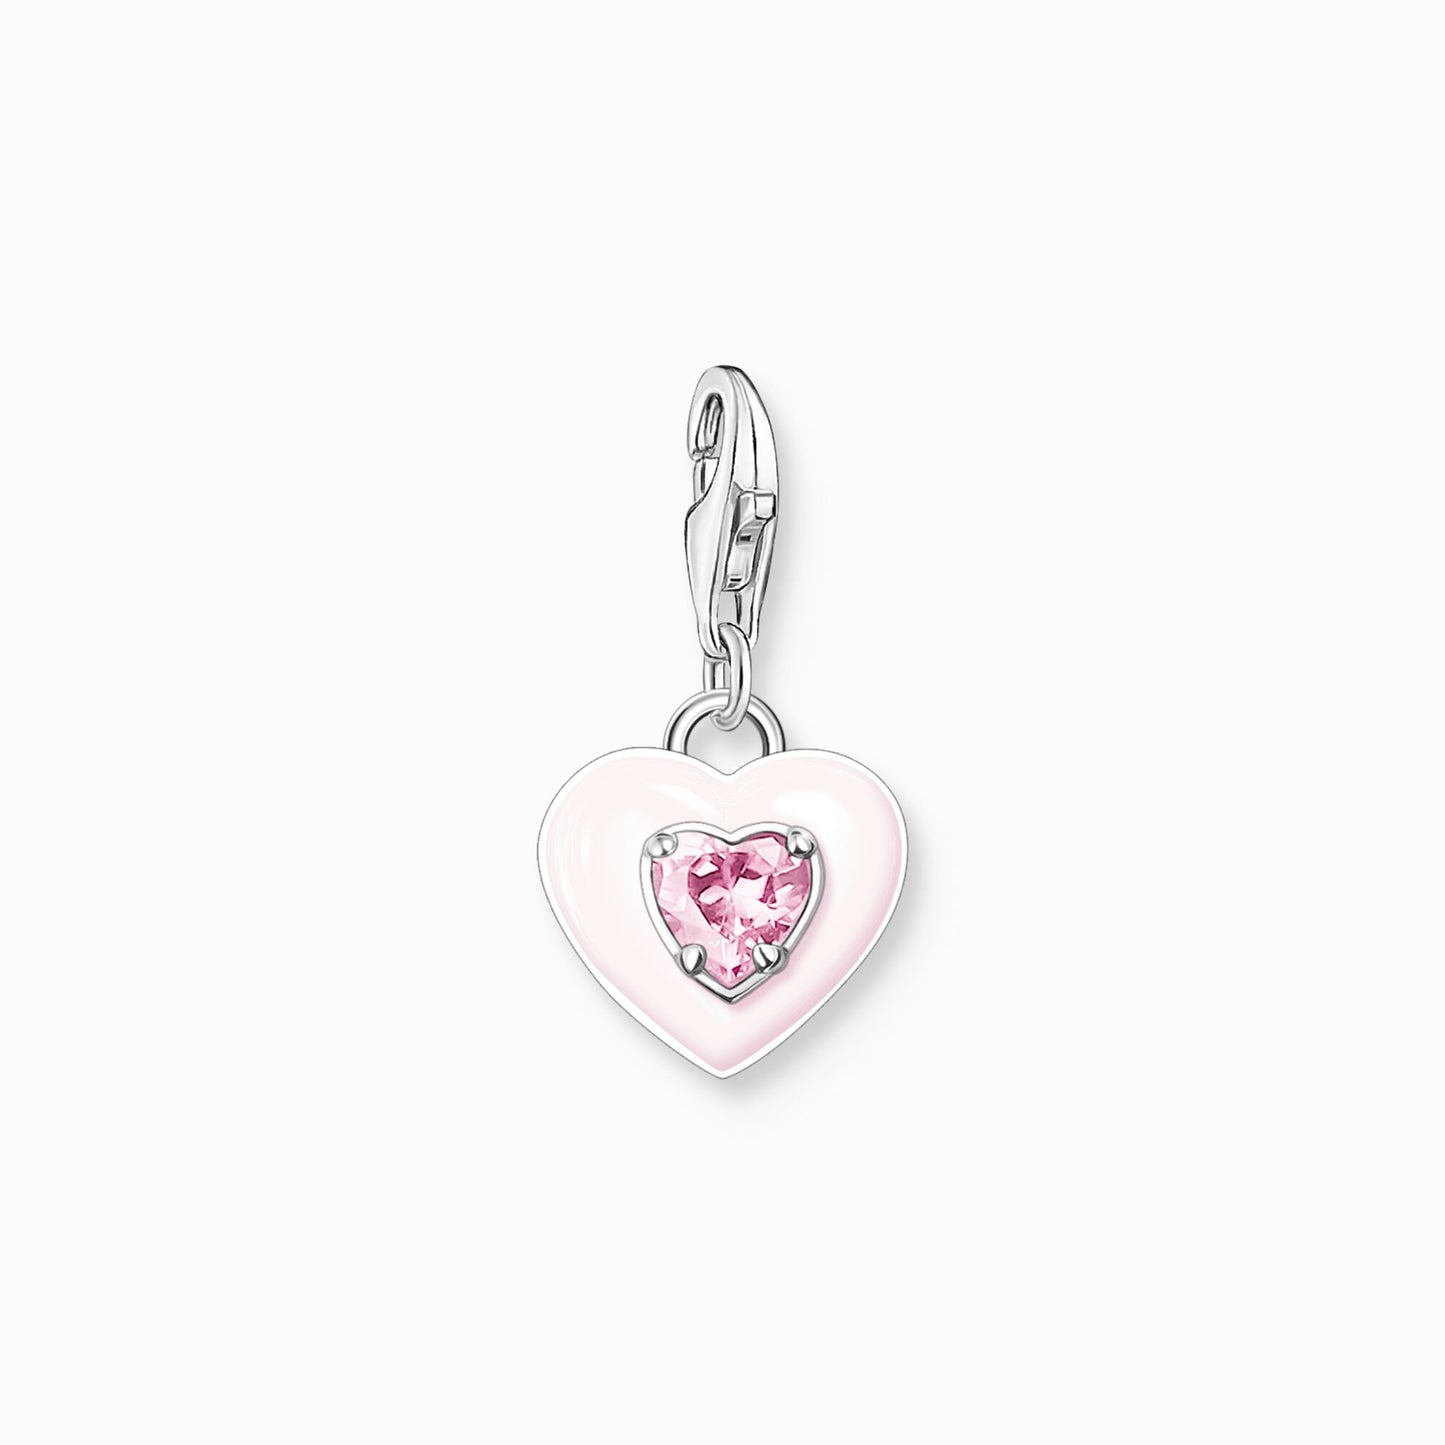 Thomas Sabo Charm Pendant Heart With Pink Stones Silver 1915-041-9